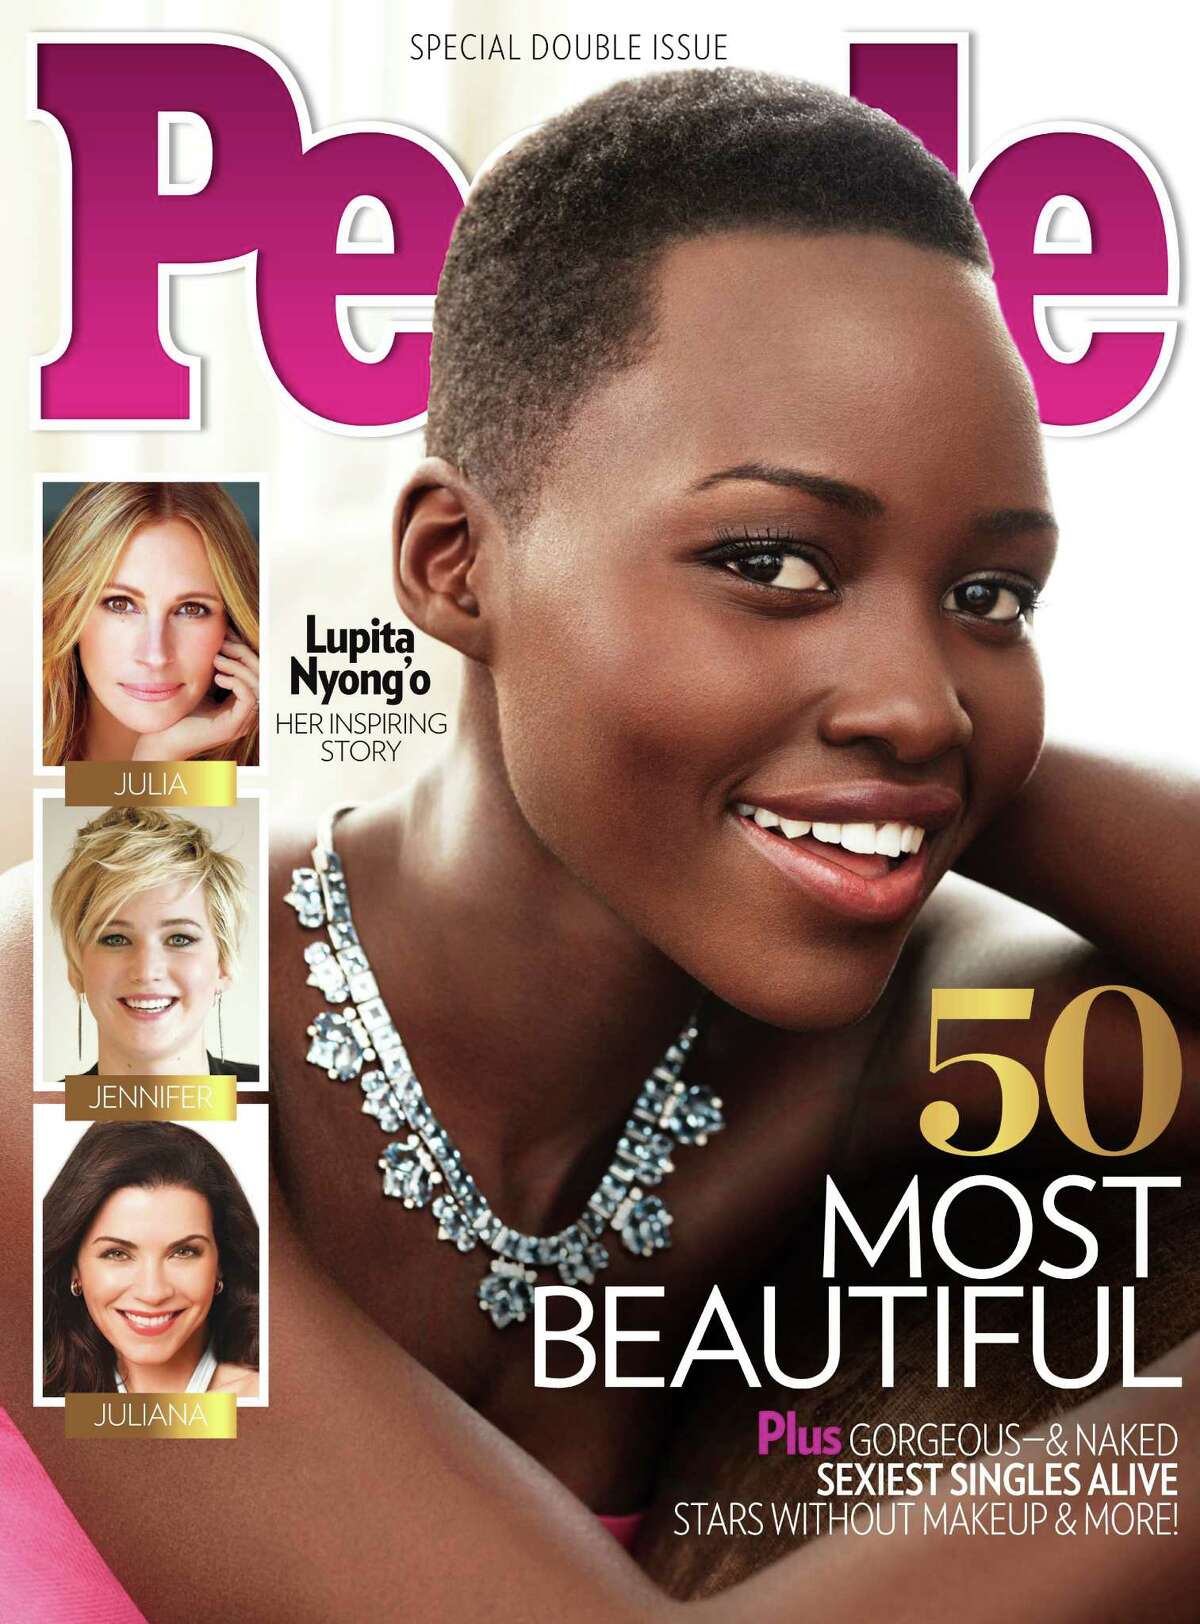 This image provided by People magazine shows the cover of its special "World's Most Beautiful" issue, featuring Lupita Nyong'o. The 31-year-old actress, who won a best supporting actress Oscar for her role in "12 Years a Slave," tops the magazine's list, announced Wednesday, April 23, 2014.Click ahead to see who else was honored by People this year.